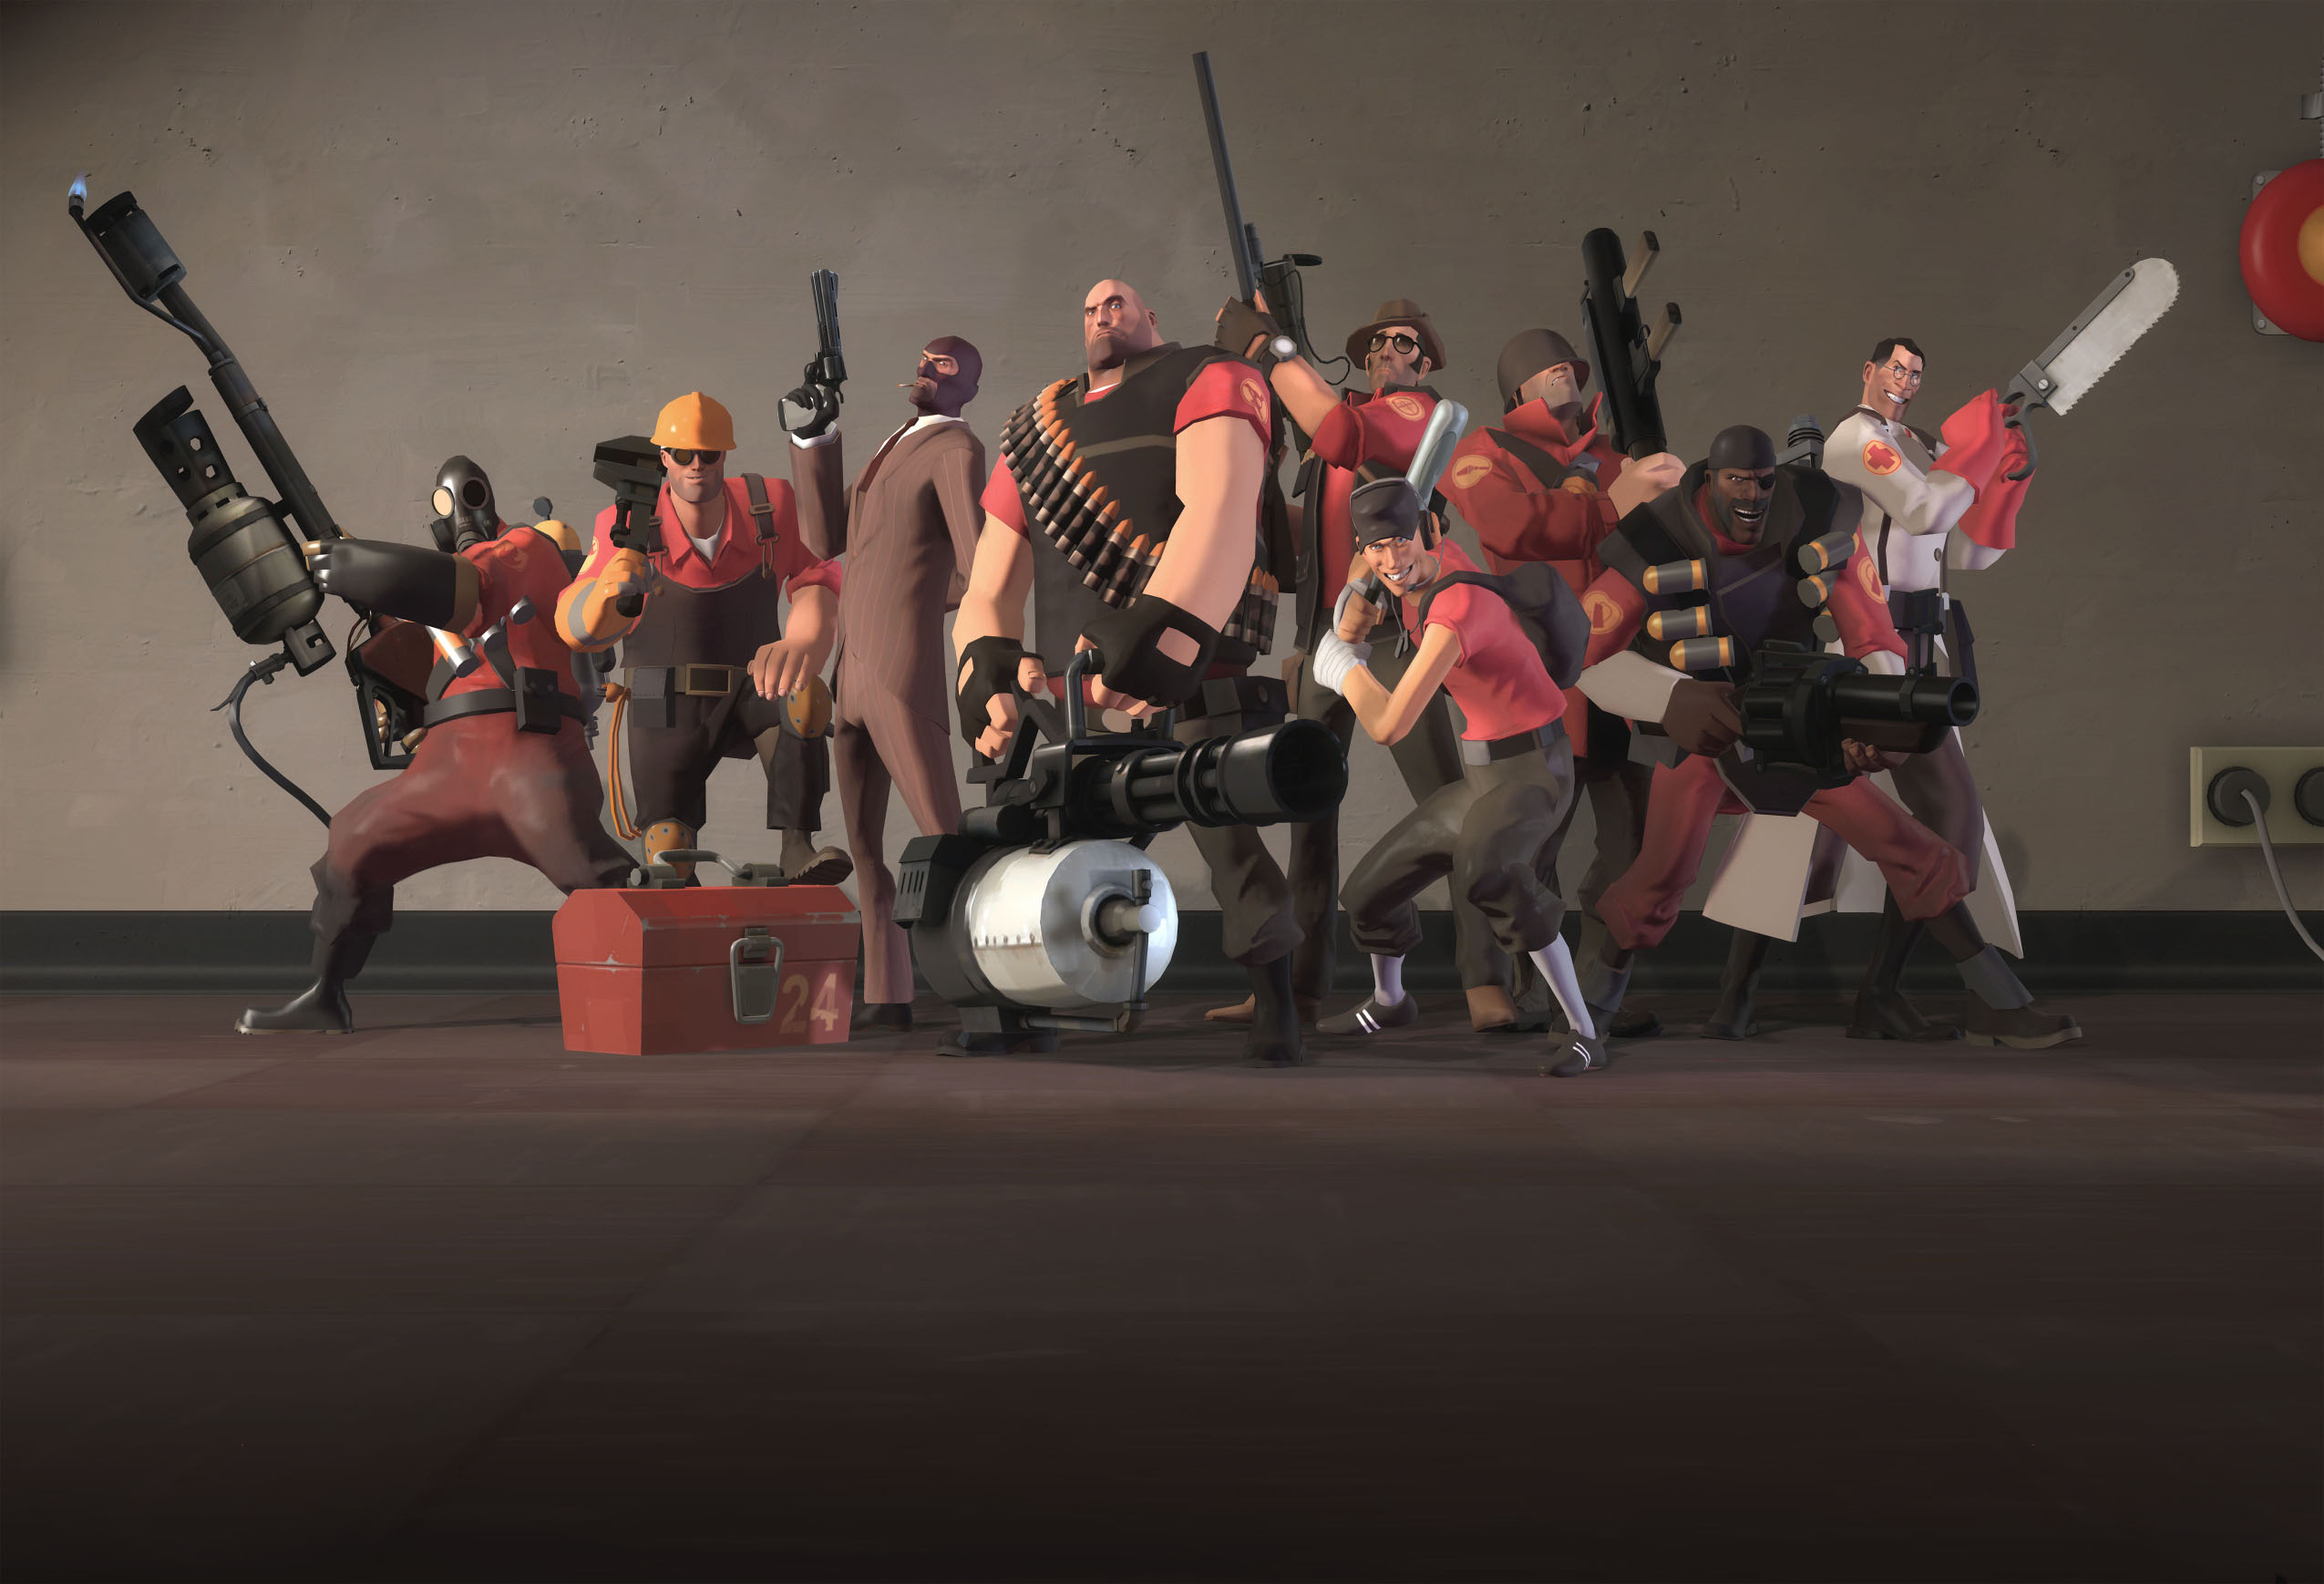 Team fortress 2 images